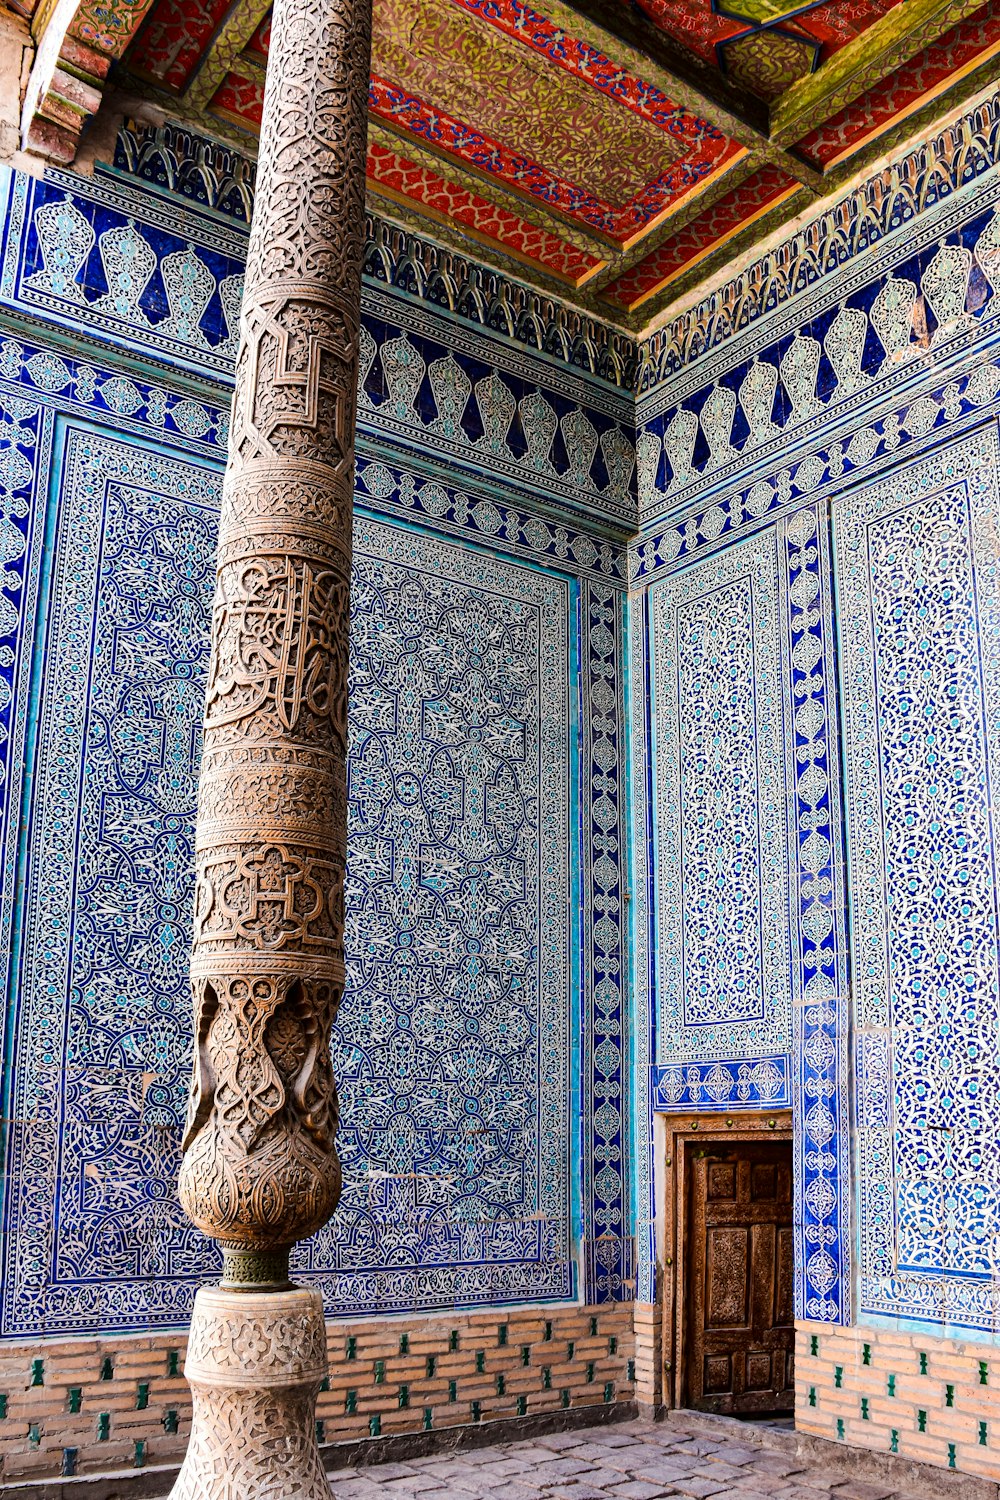 a pillar in front of a wall with a design on it